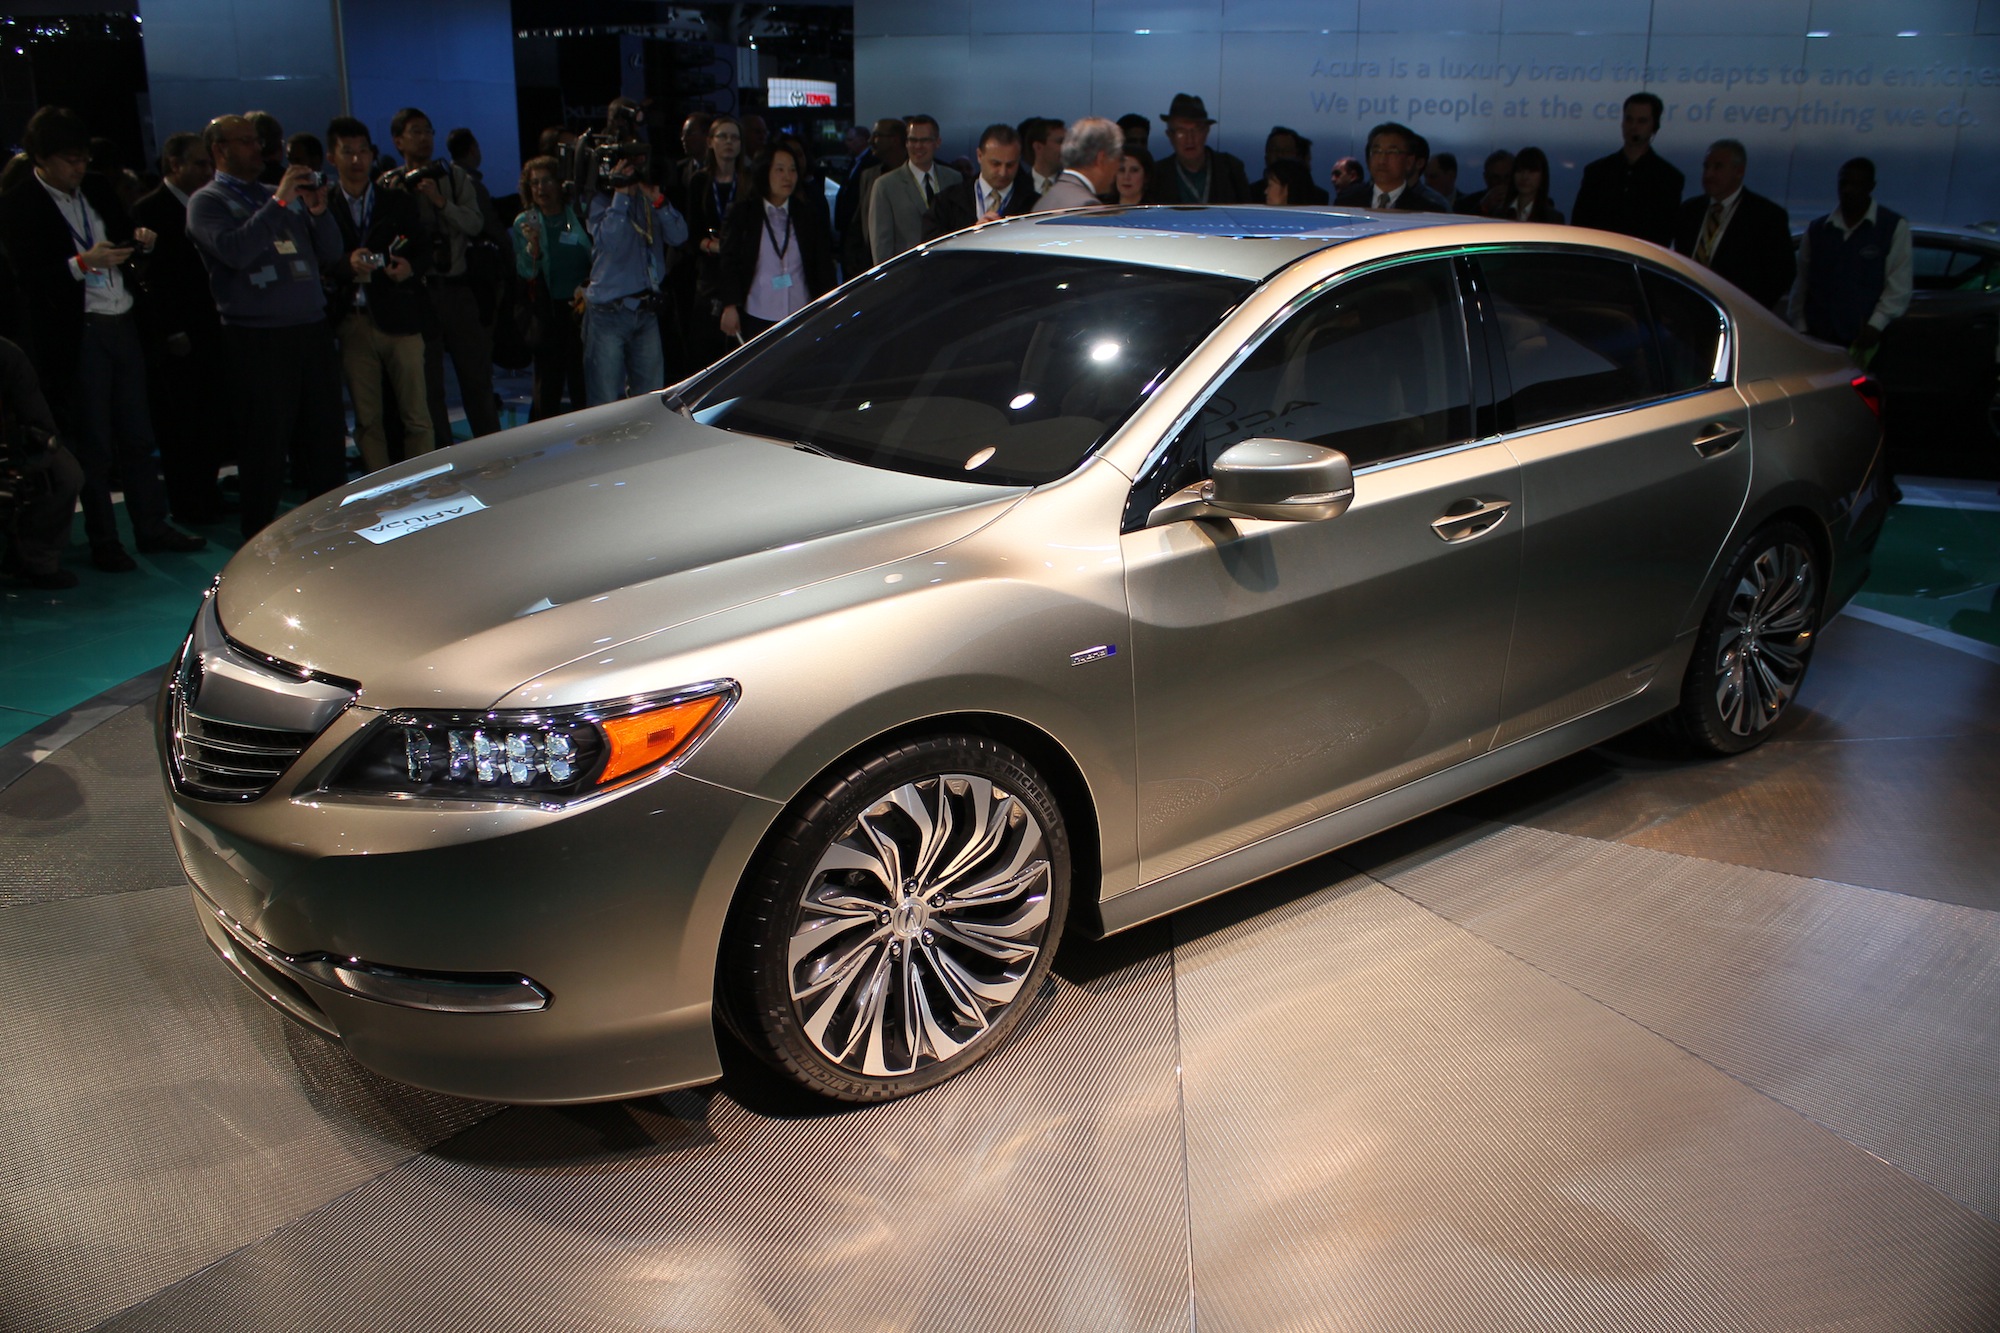 2014 Acura RLX May Be Built In The United States